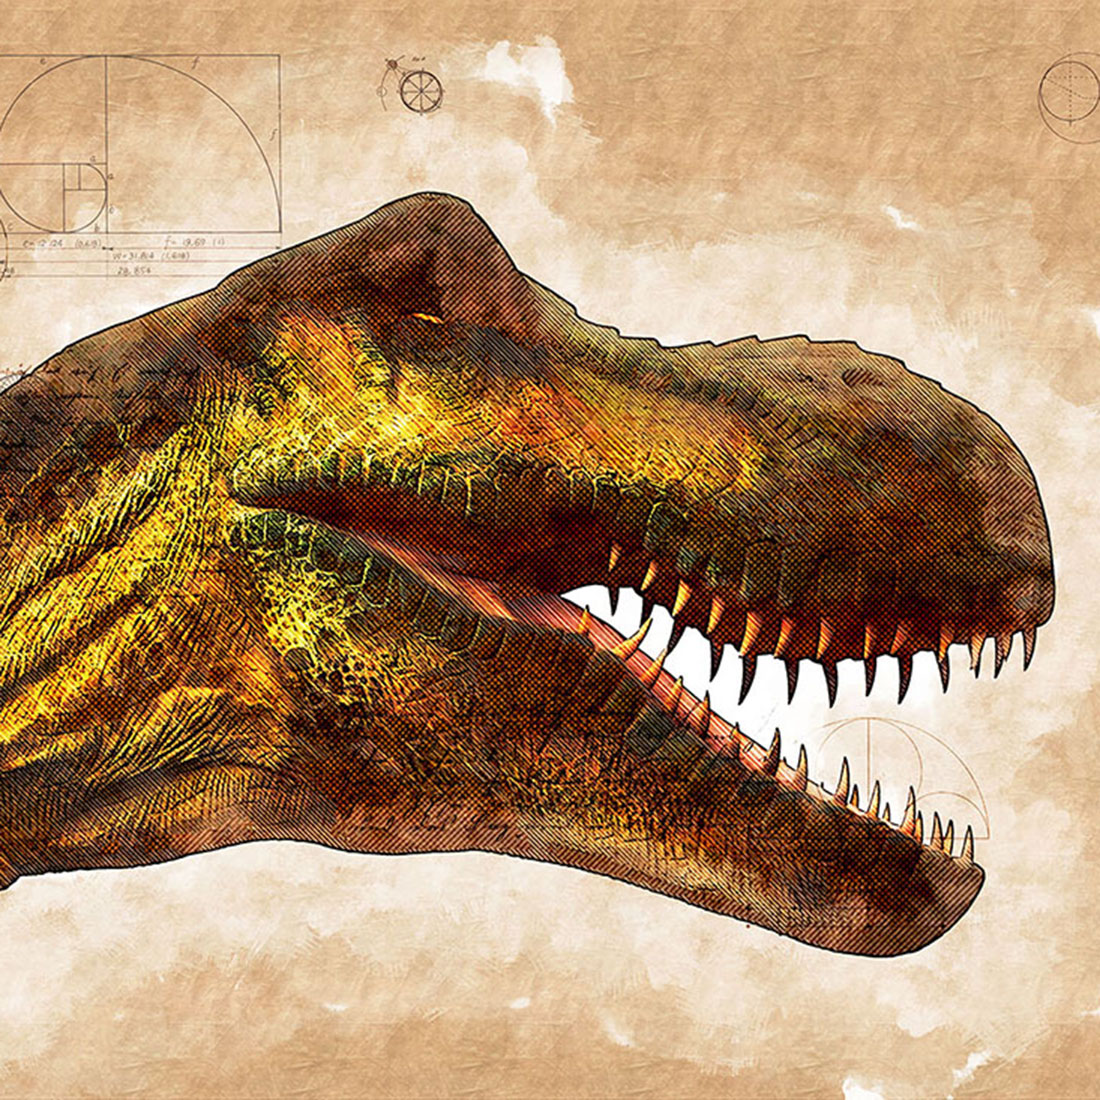 Dino HQ Graphics with Rustic Style cover image.